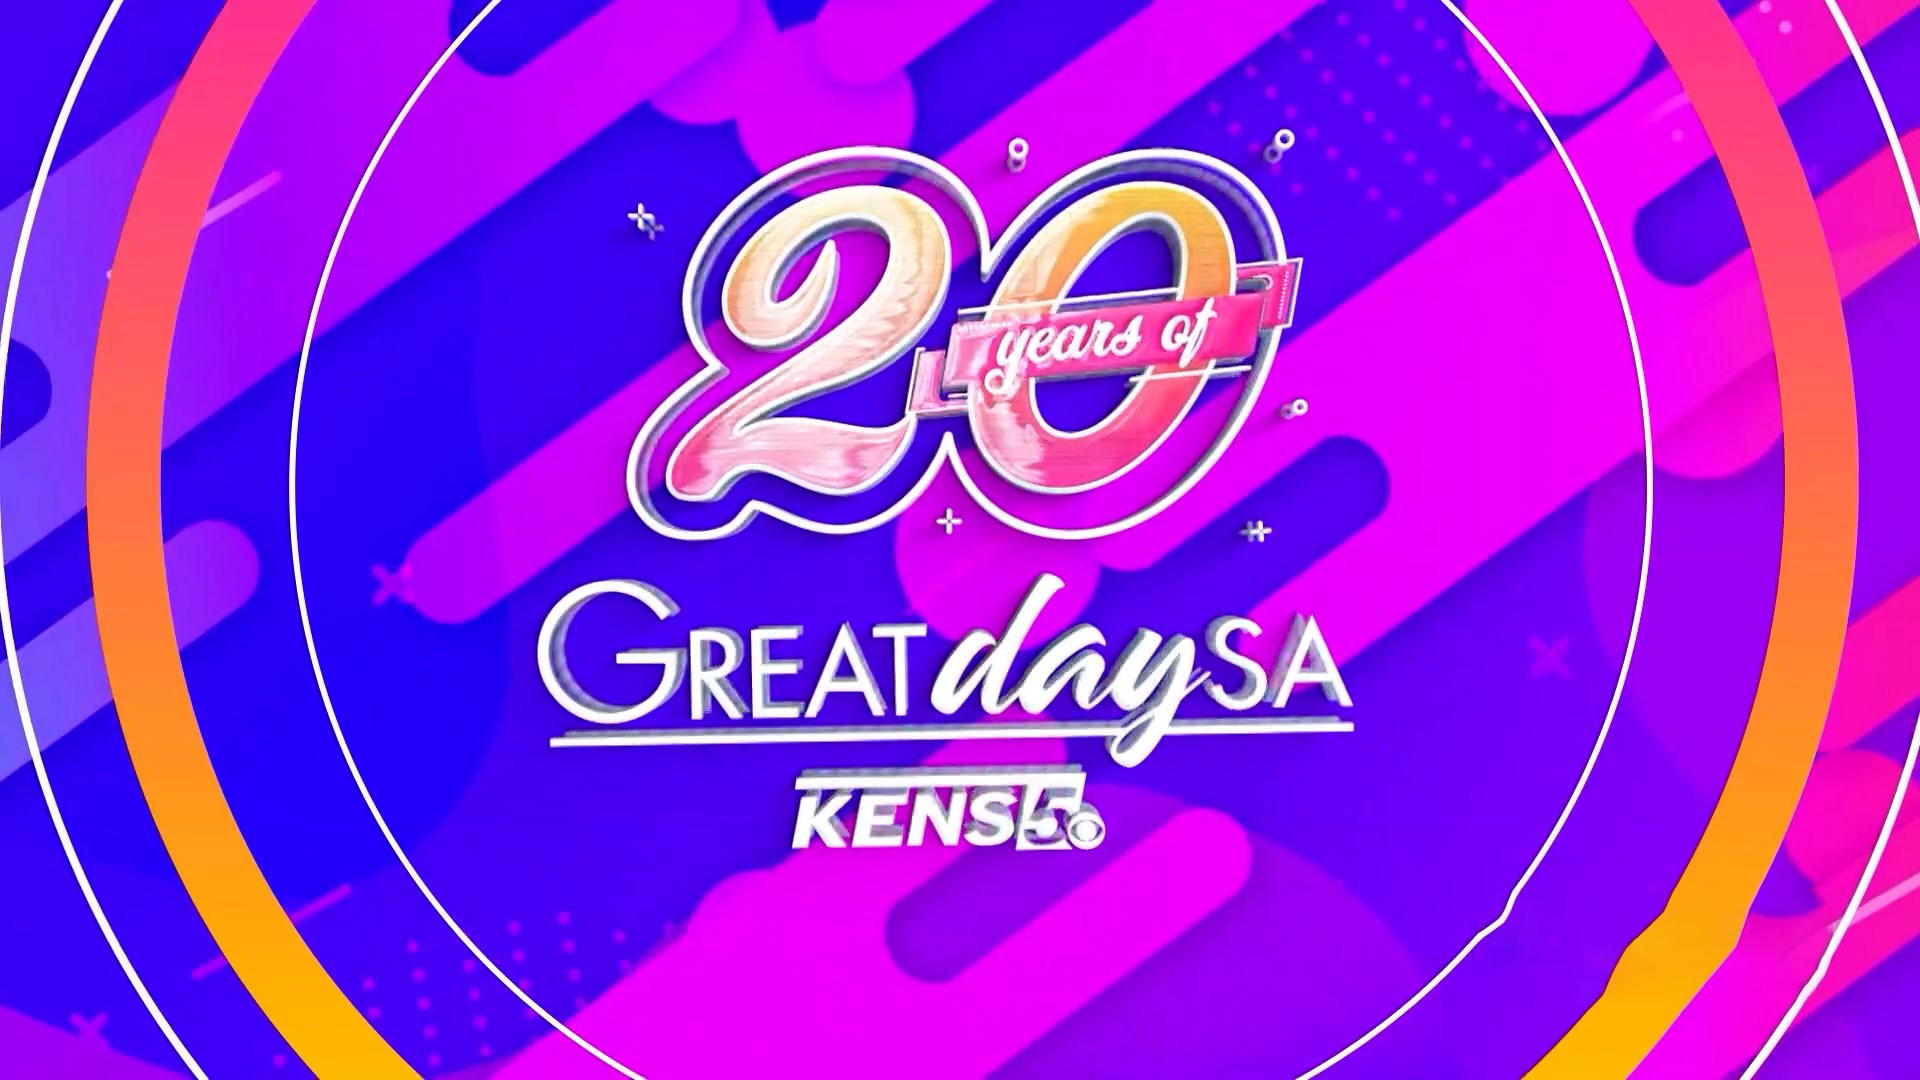 "Great Day SA" celebrates two decades on air in this special that aired Sept. 8, 2023, with host Roma Villavicencio and co-hosts Paul Mireles and Clarke Finney.